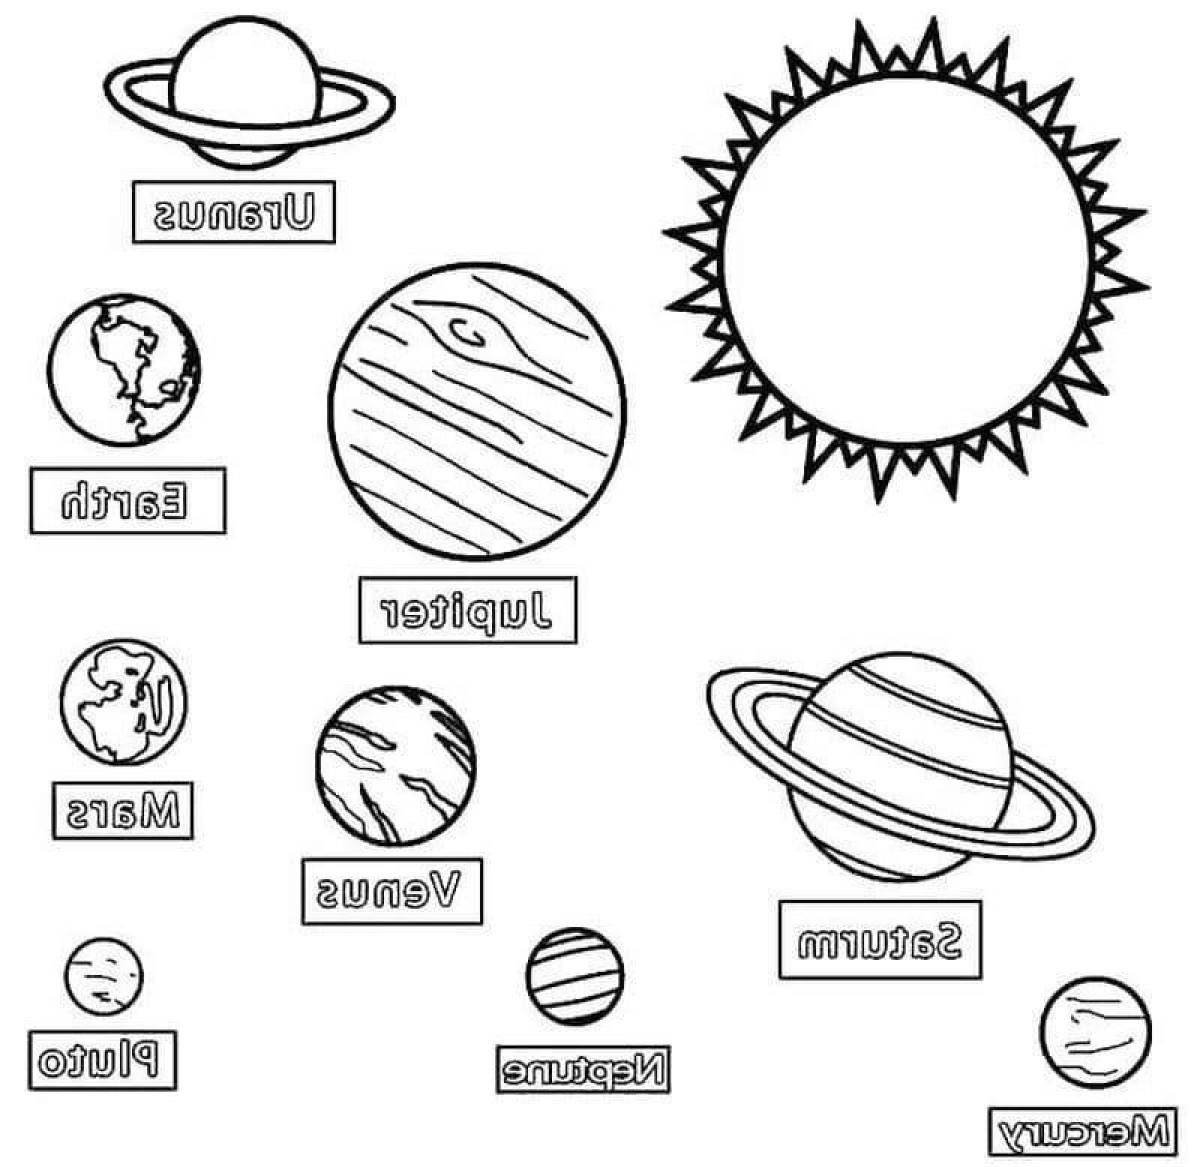 Tempting solar system coloring book